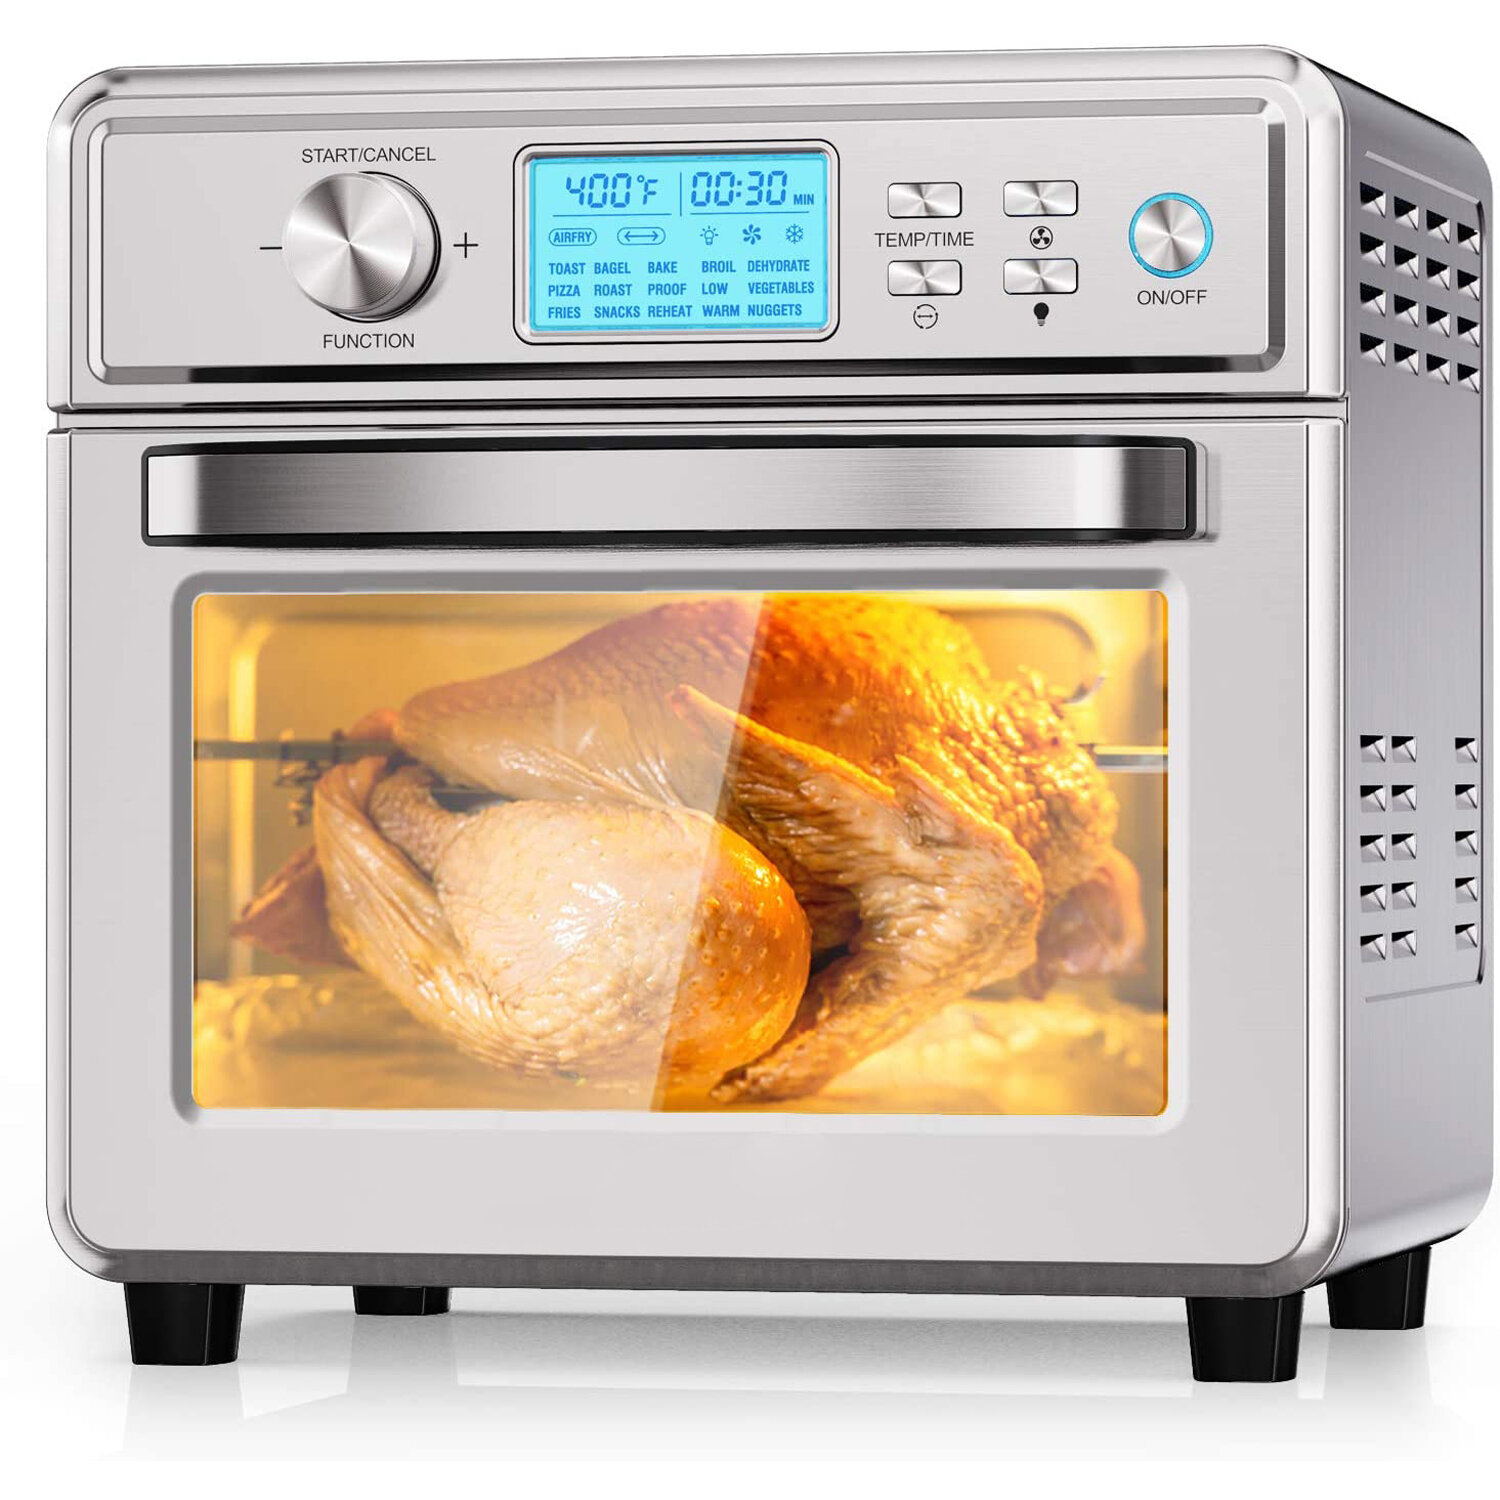 19 Quart Air Fryer Toaster Oven Combo 13-in-1 Air Fryer Oven 6 Accessories Included Stainless Steel LED Digital Touchscreen Convection Countertop Oven Rotisserie and Dehydrator 1700W